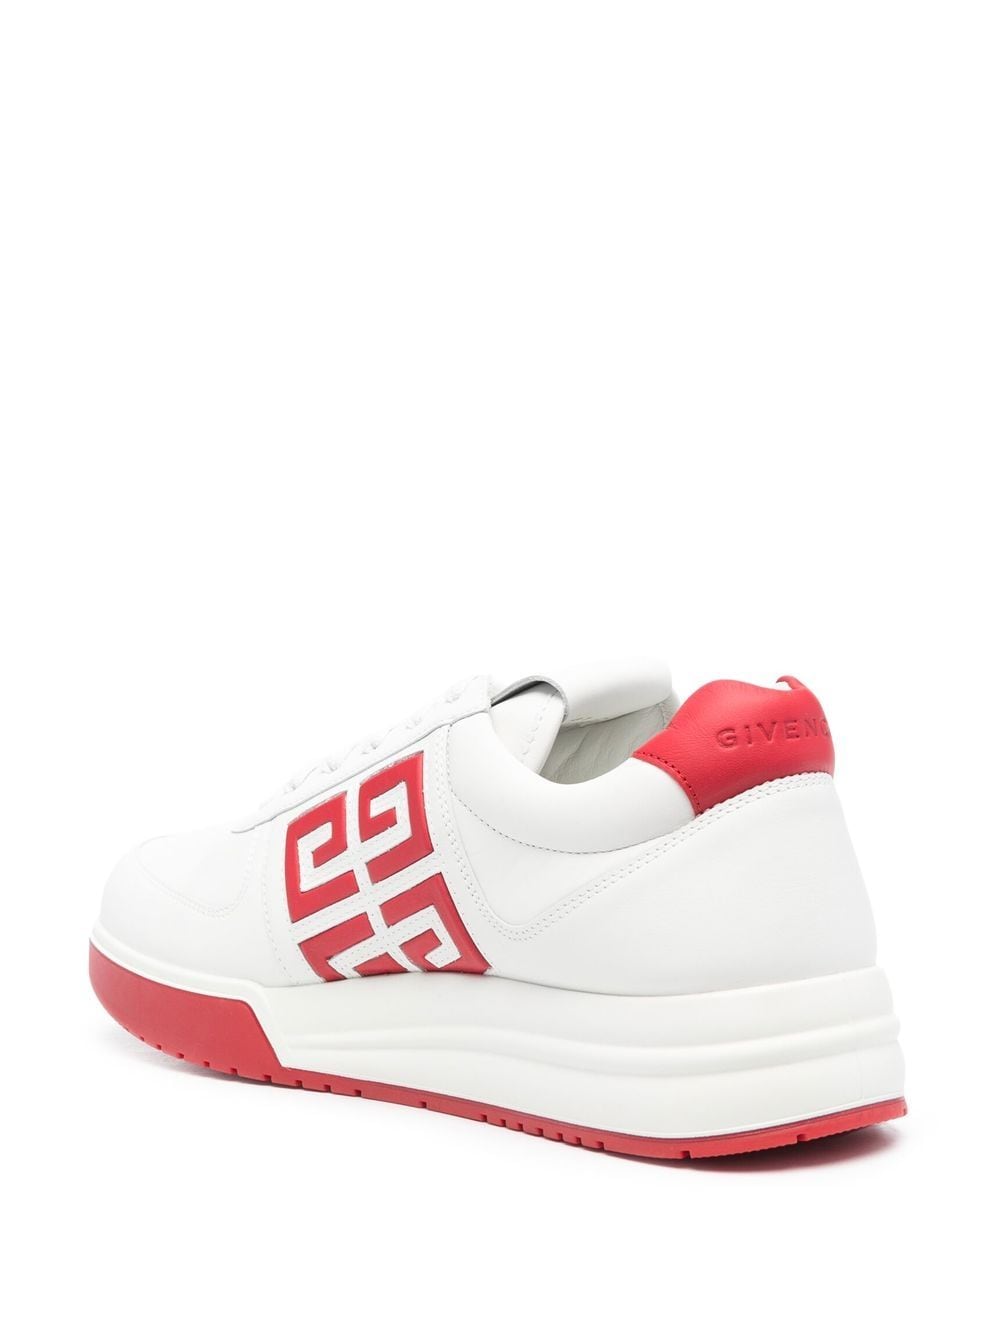 Red/white 4G low-top sneakers